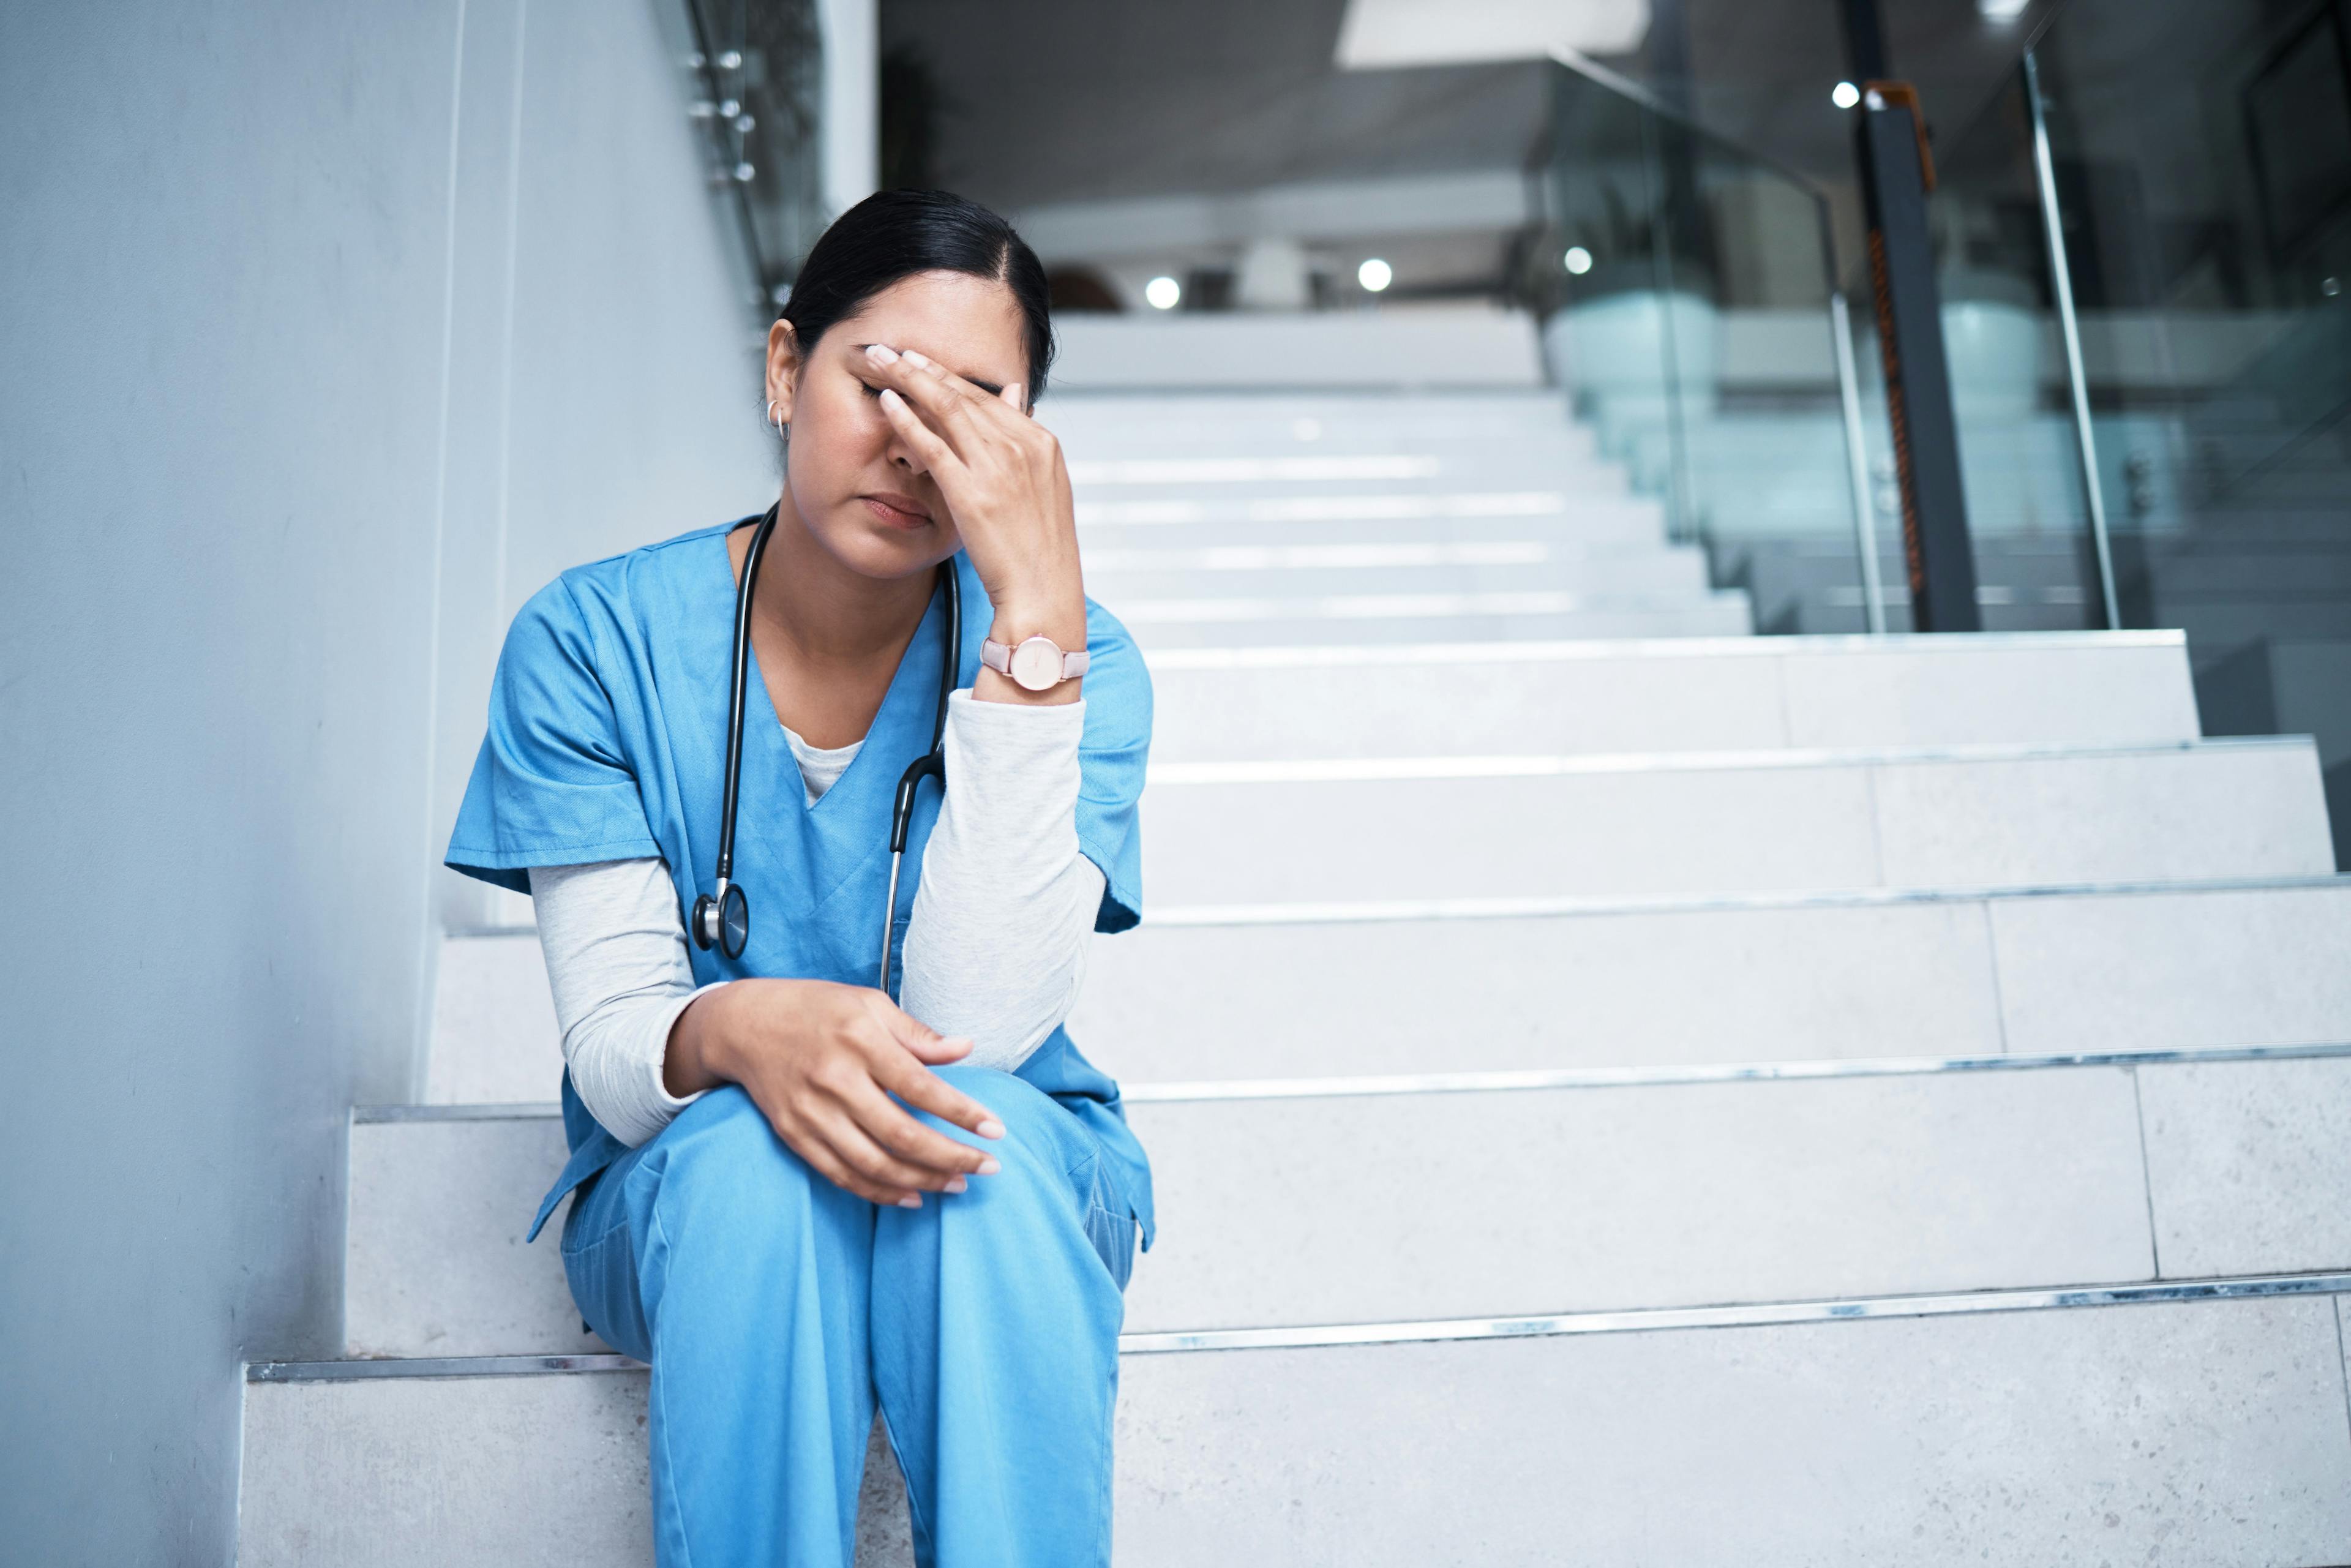 Tired doctor in scrubs sitting on stairs ©Courtney Haas/peopleimages.com-stock.adobe.com